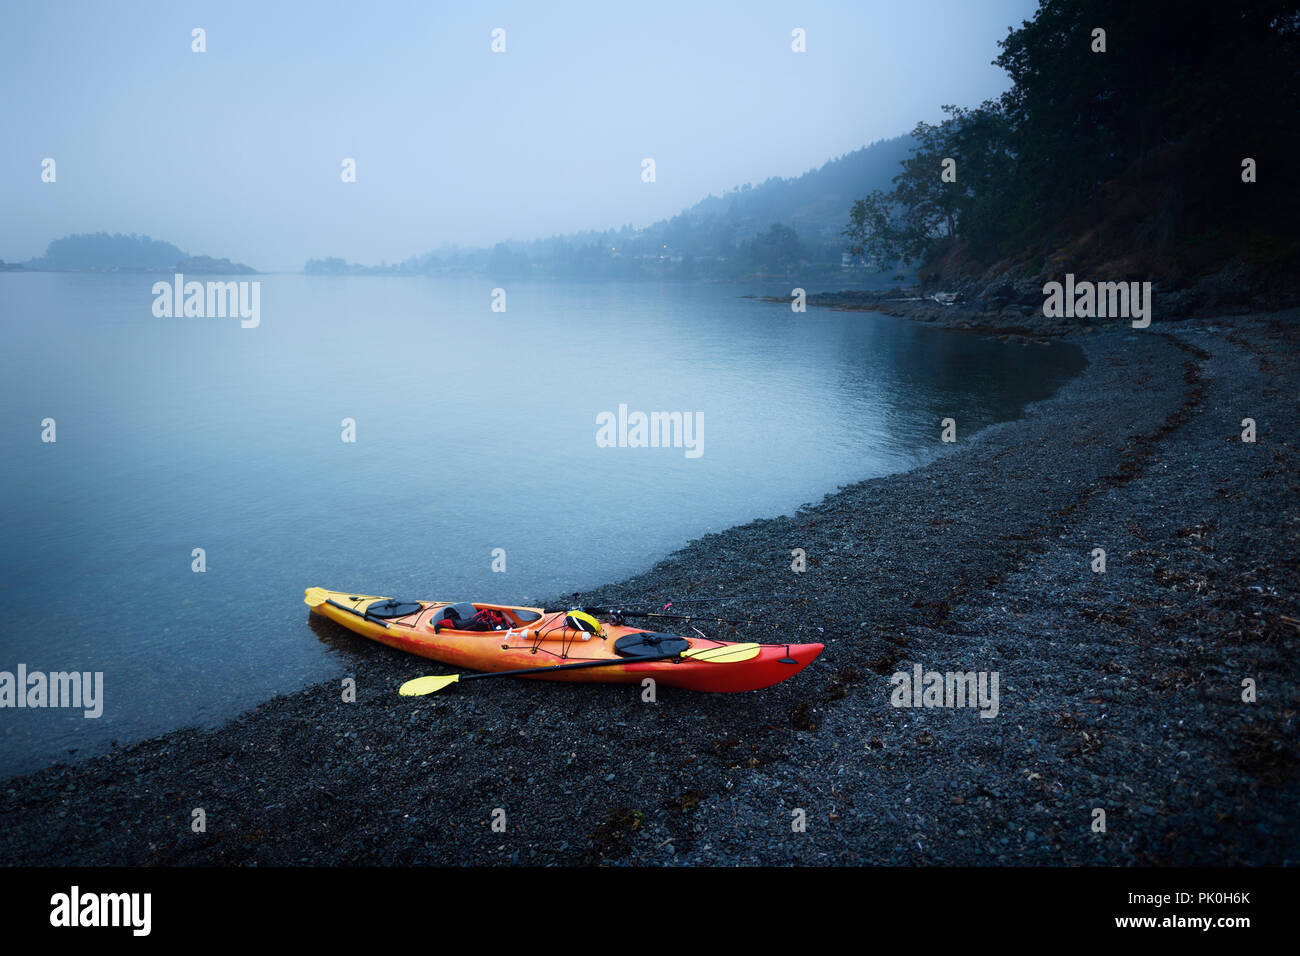 Red kayak on the Salish sea shore in yearly morning mist. Nanaimo, Vancouver Island, British Columbia, Canada. Stock Photo